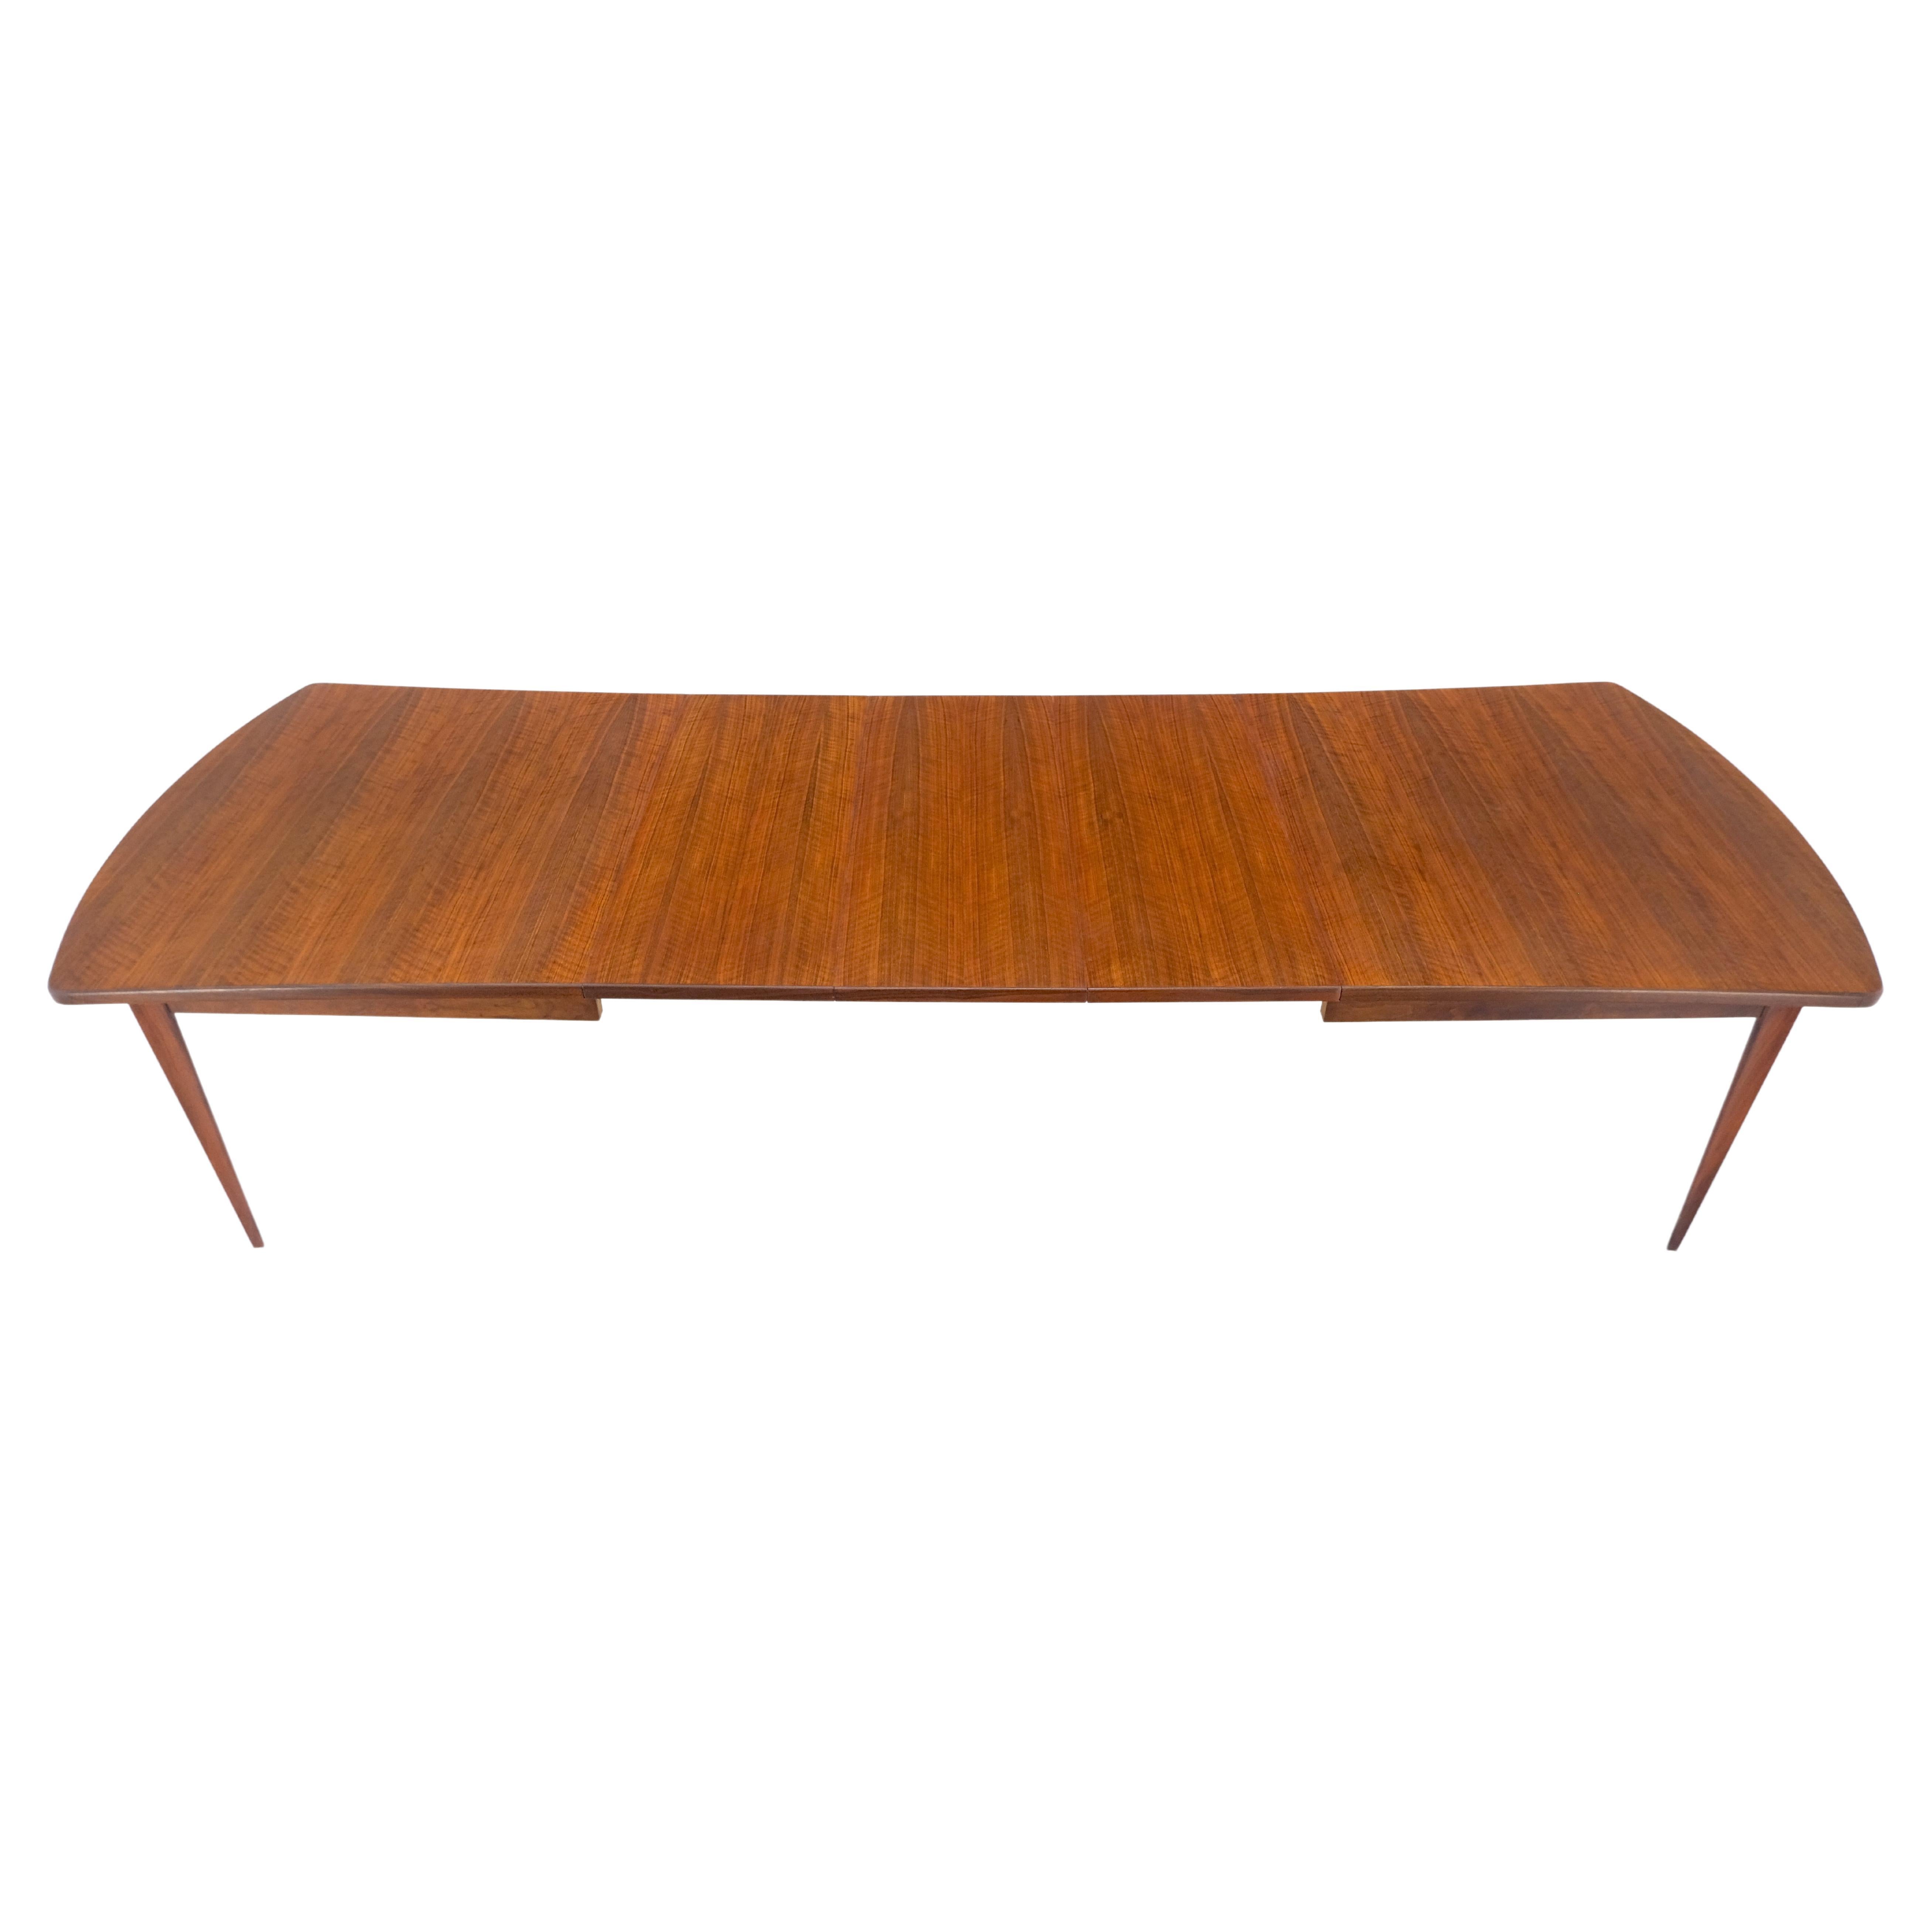 Concave Side Rounded Ends Shape Large Oiled Walnut Dining Table 3 Leaves MINT!